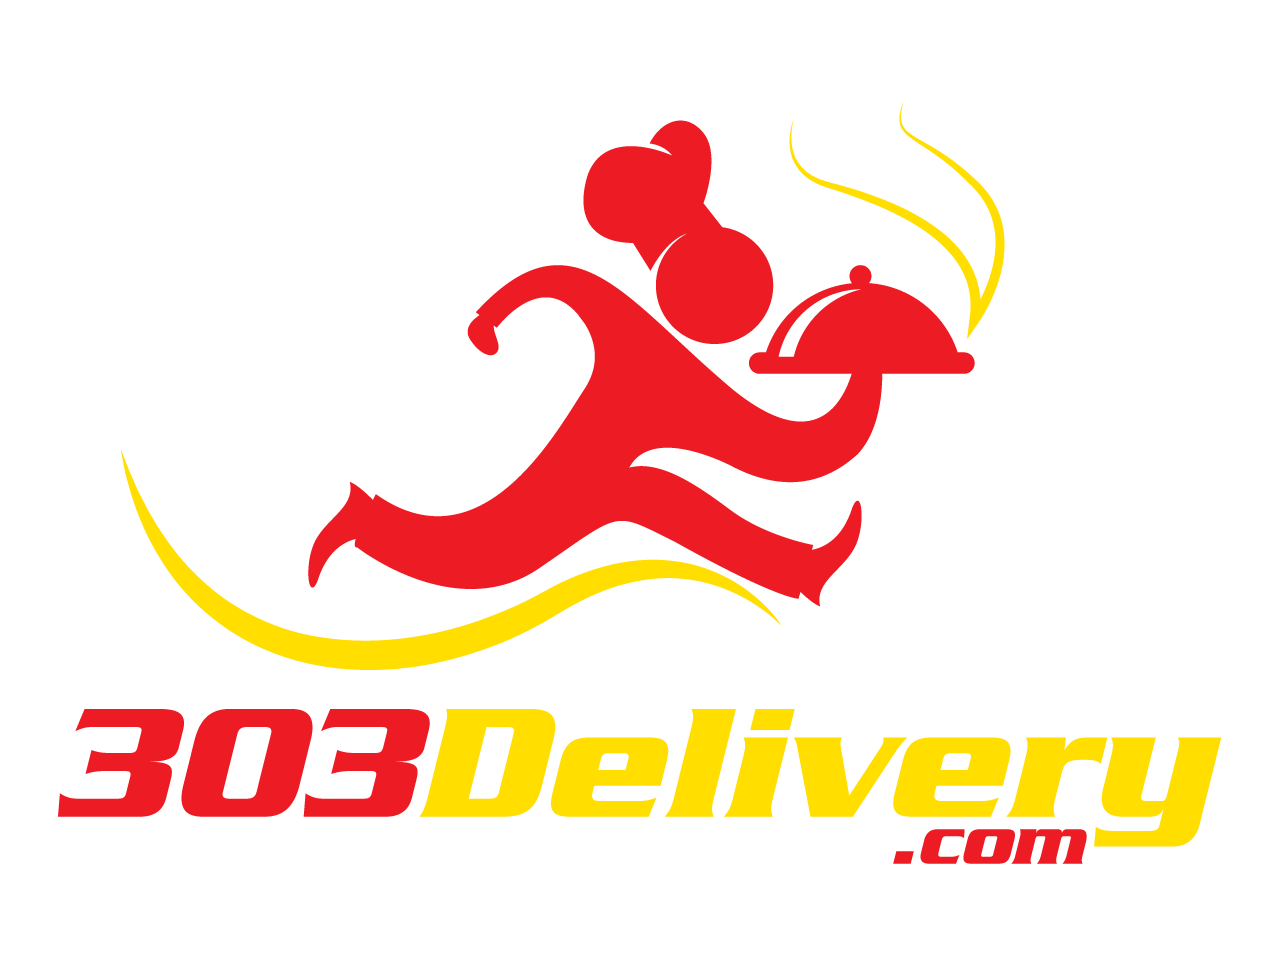 Delivery Logo - Creative Food Delivery Business Logos. Food Delivery Business